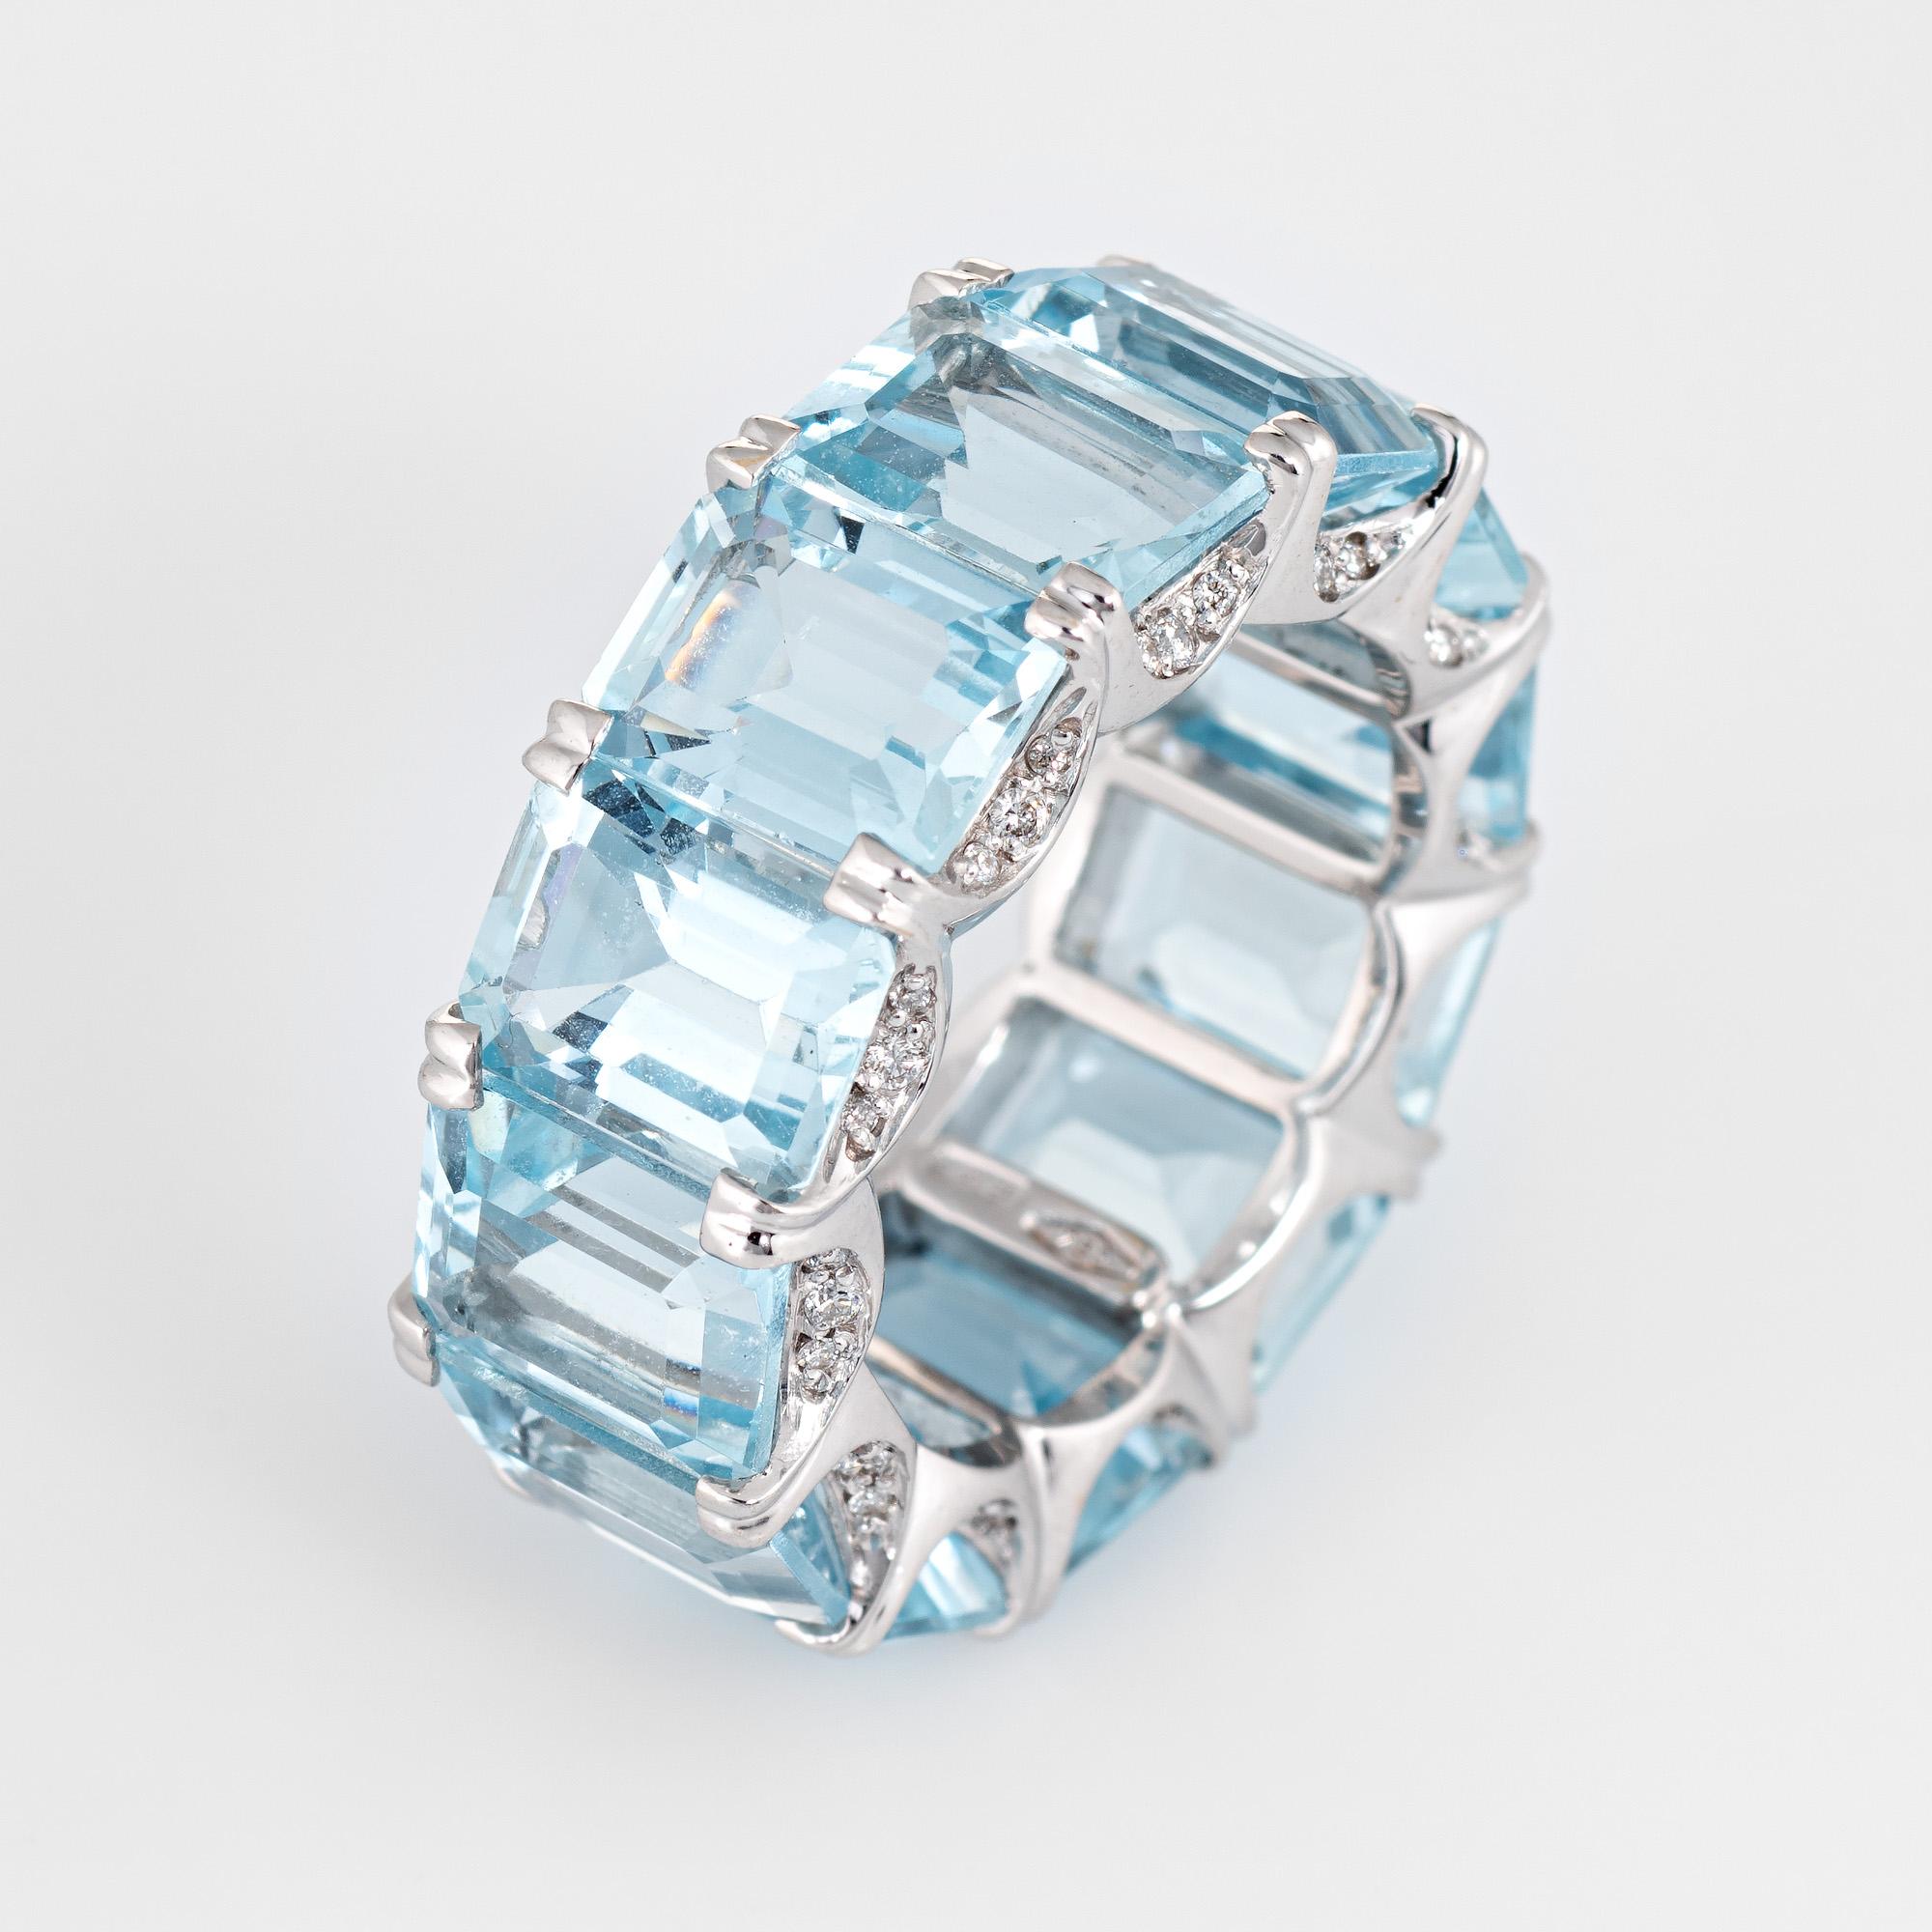 Stylish aquamarine & diamond eternity ring crafted in 18 karat white gold. 

12 emerald cut aquamarines are each estimated at 1.50 carats with a total estimated weight of 18 carats. The aquamarines are in excellent condition and free of cracks or